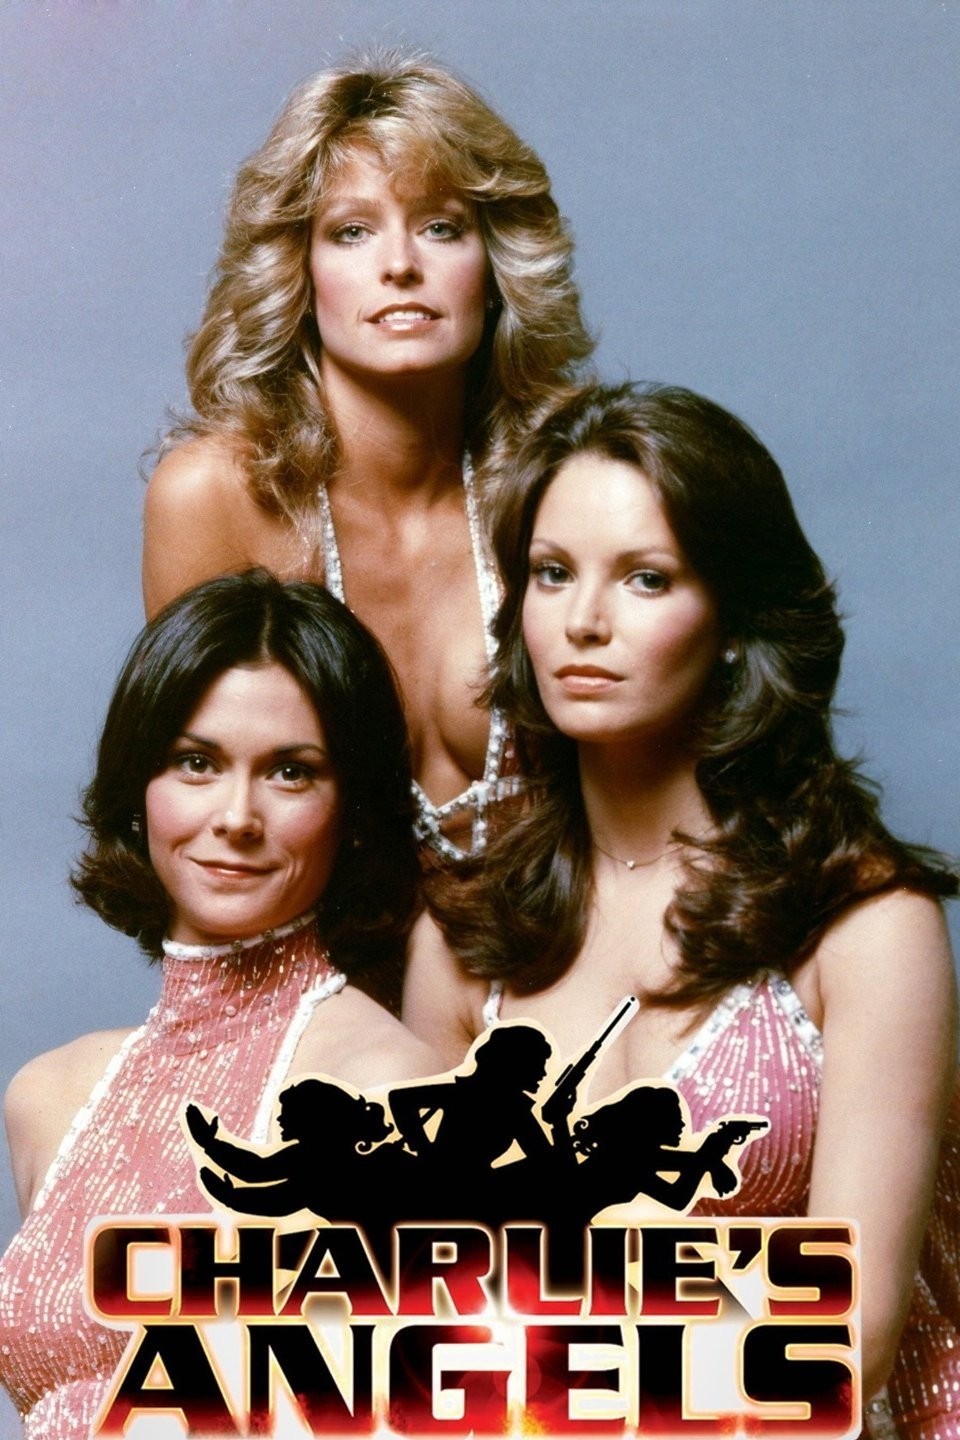 Category:Charlie's Angels - Wikimedia Commons